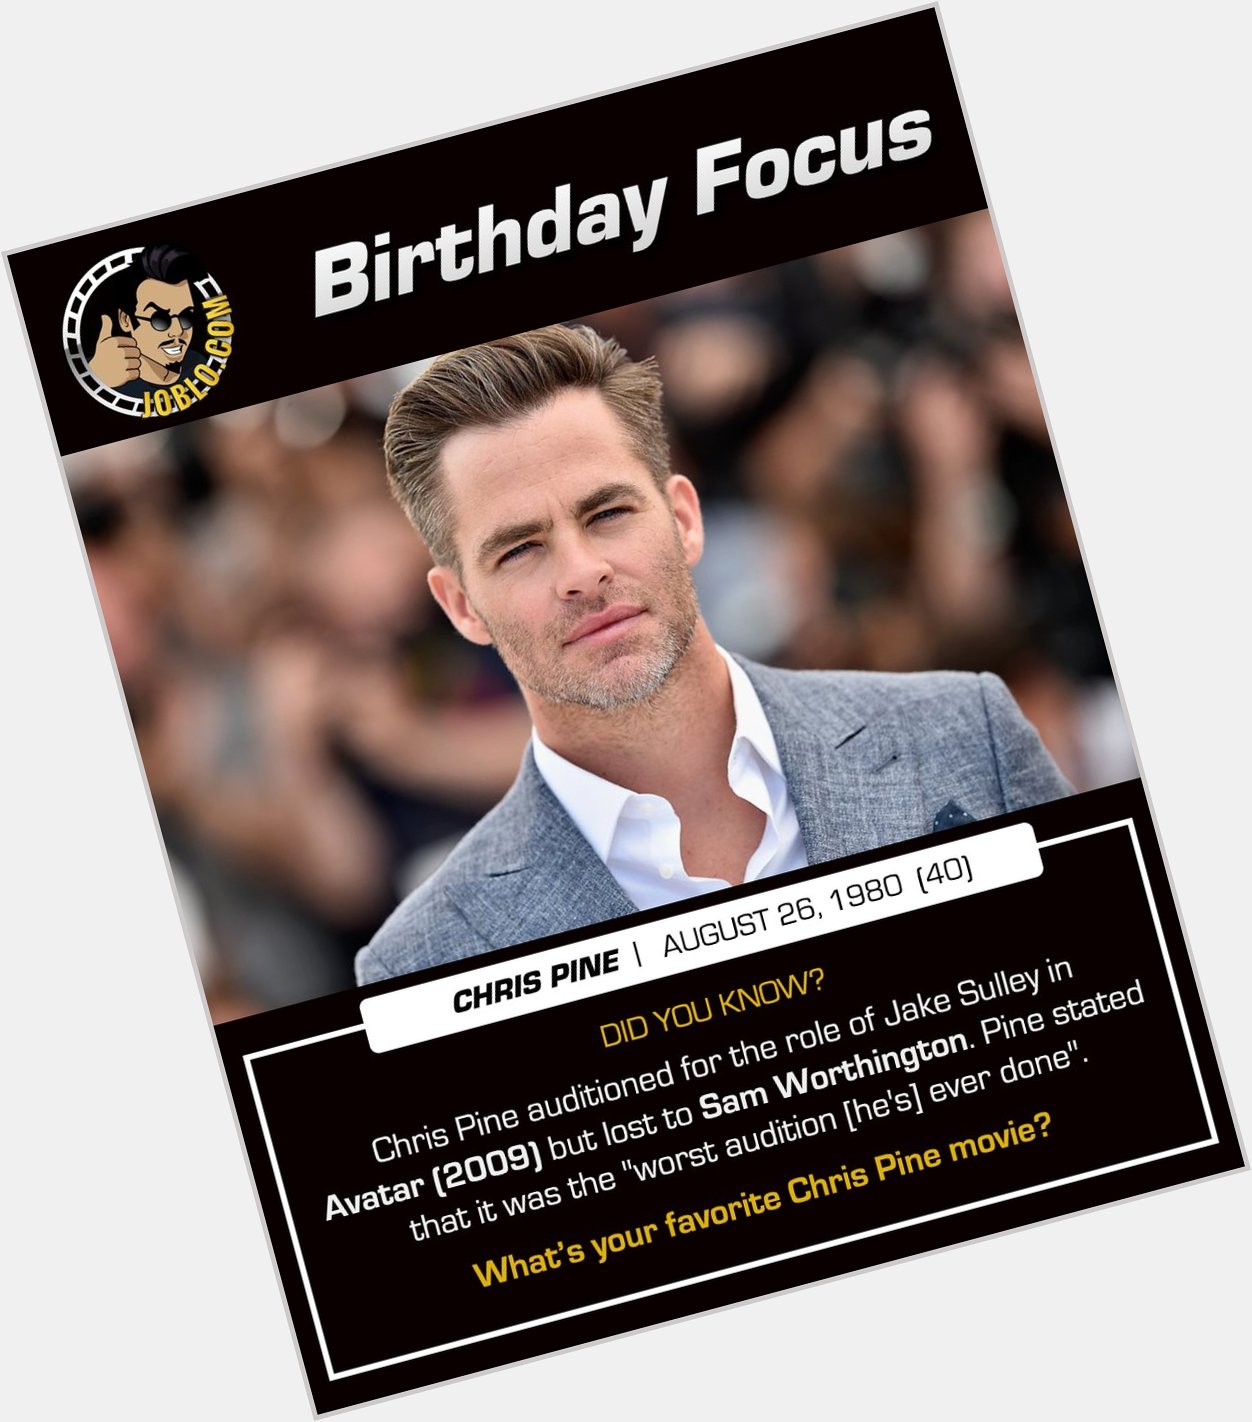 Happy 40th birthday to Chris Pine!

What\s your favorite role of his? 